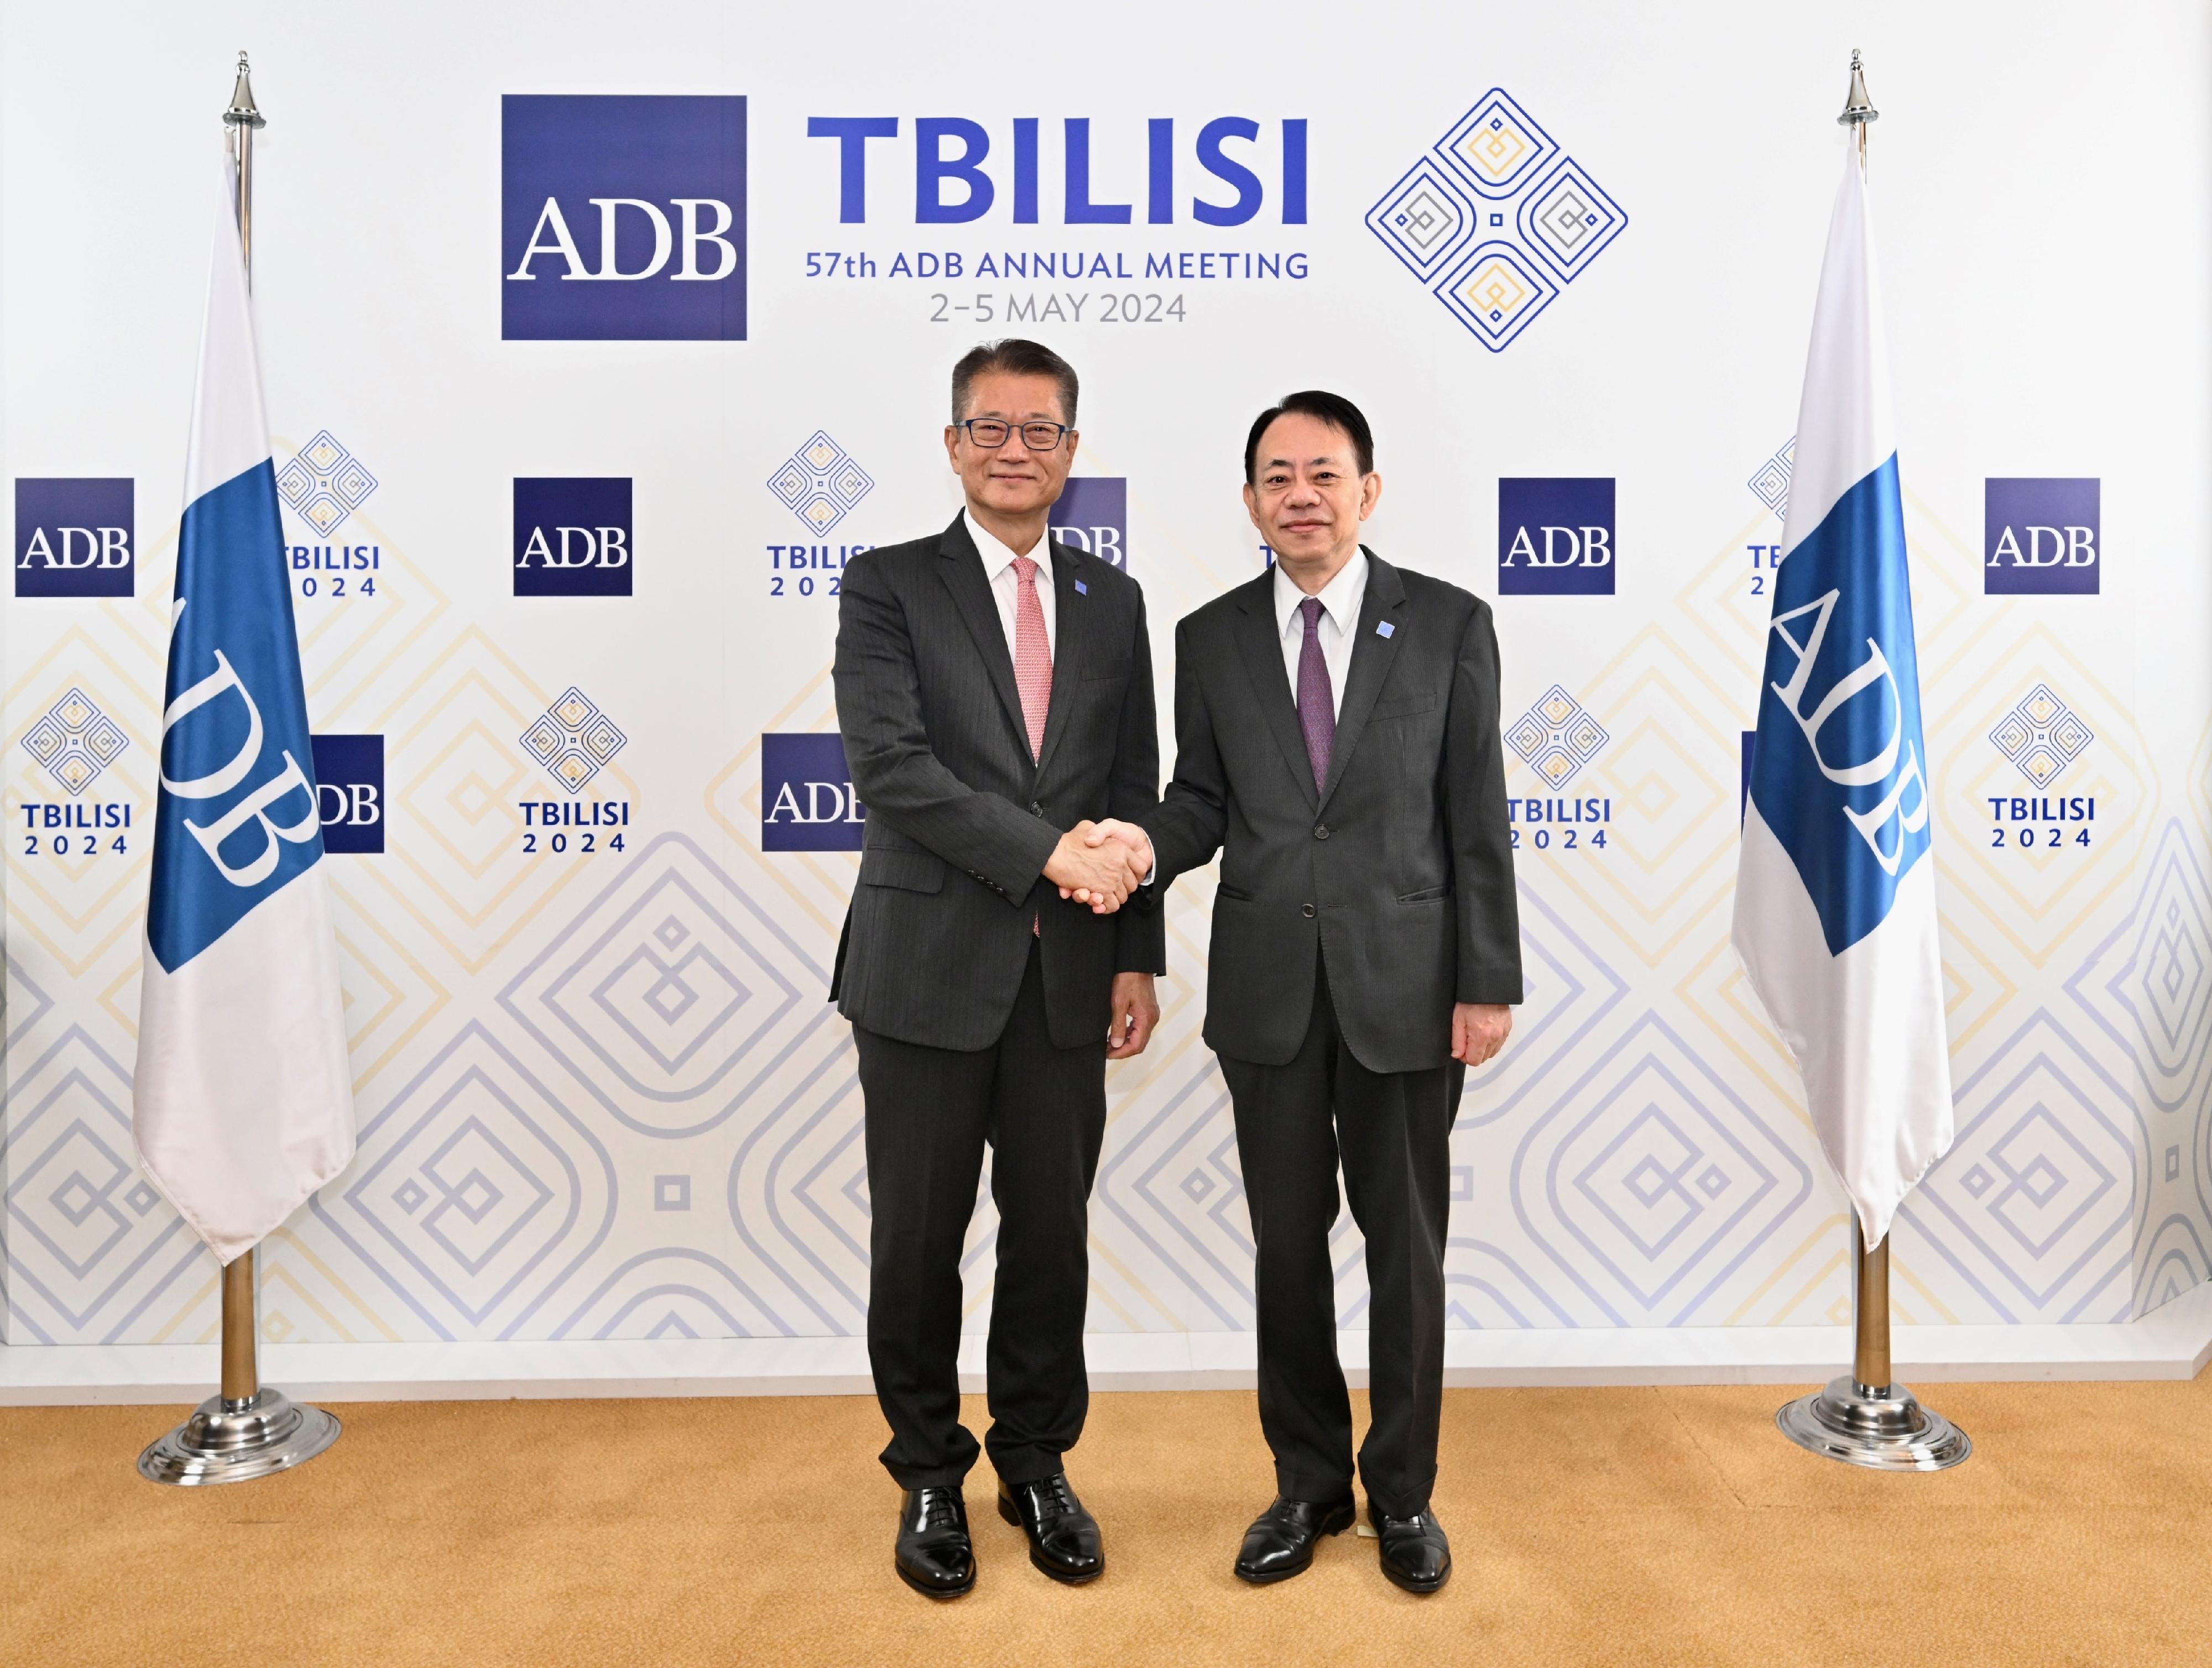 The Financial Secretary, Mr Paul Chan, yesterday (May 2, Tbilisi time) began his visit to Tbilisi, Georgia. Photo shows Mr Chan (left) meeting with the President of the Asian Development Bank, Mr Masatsugu Asakawa (right).